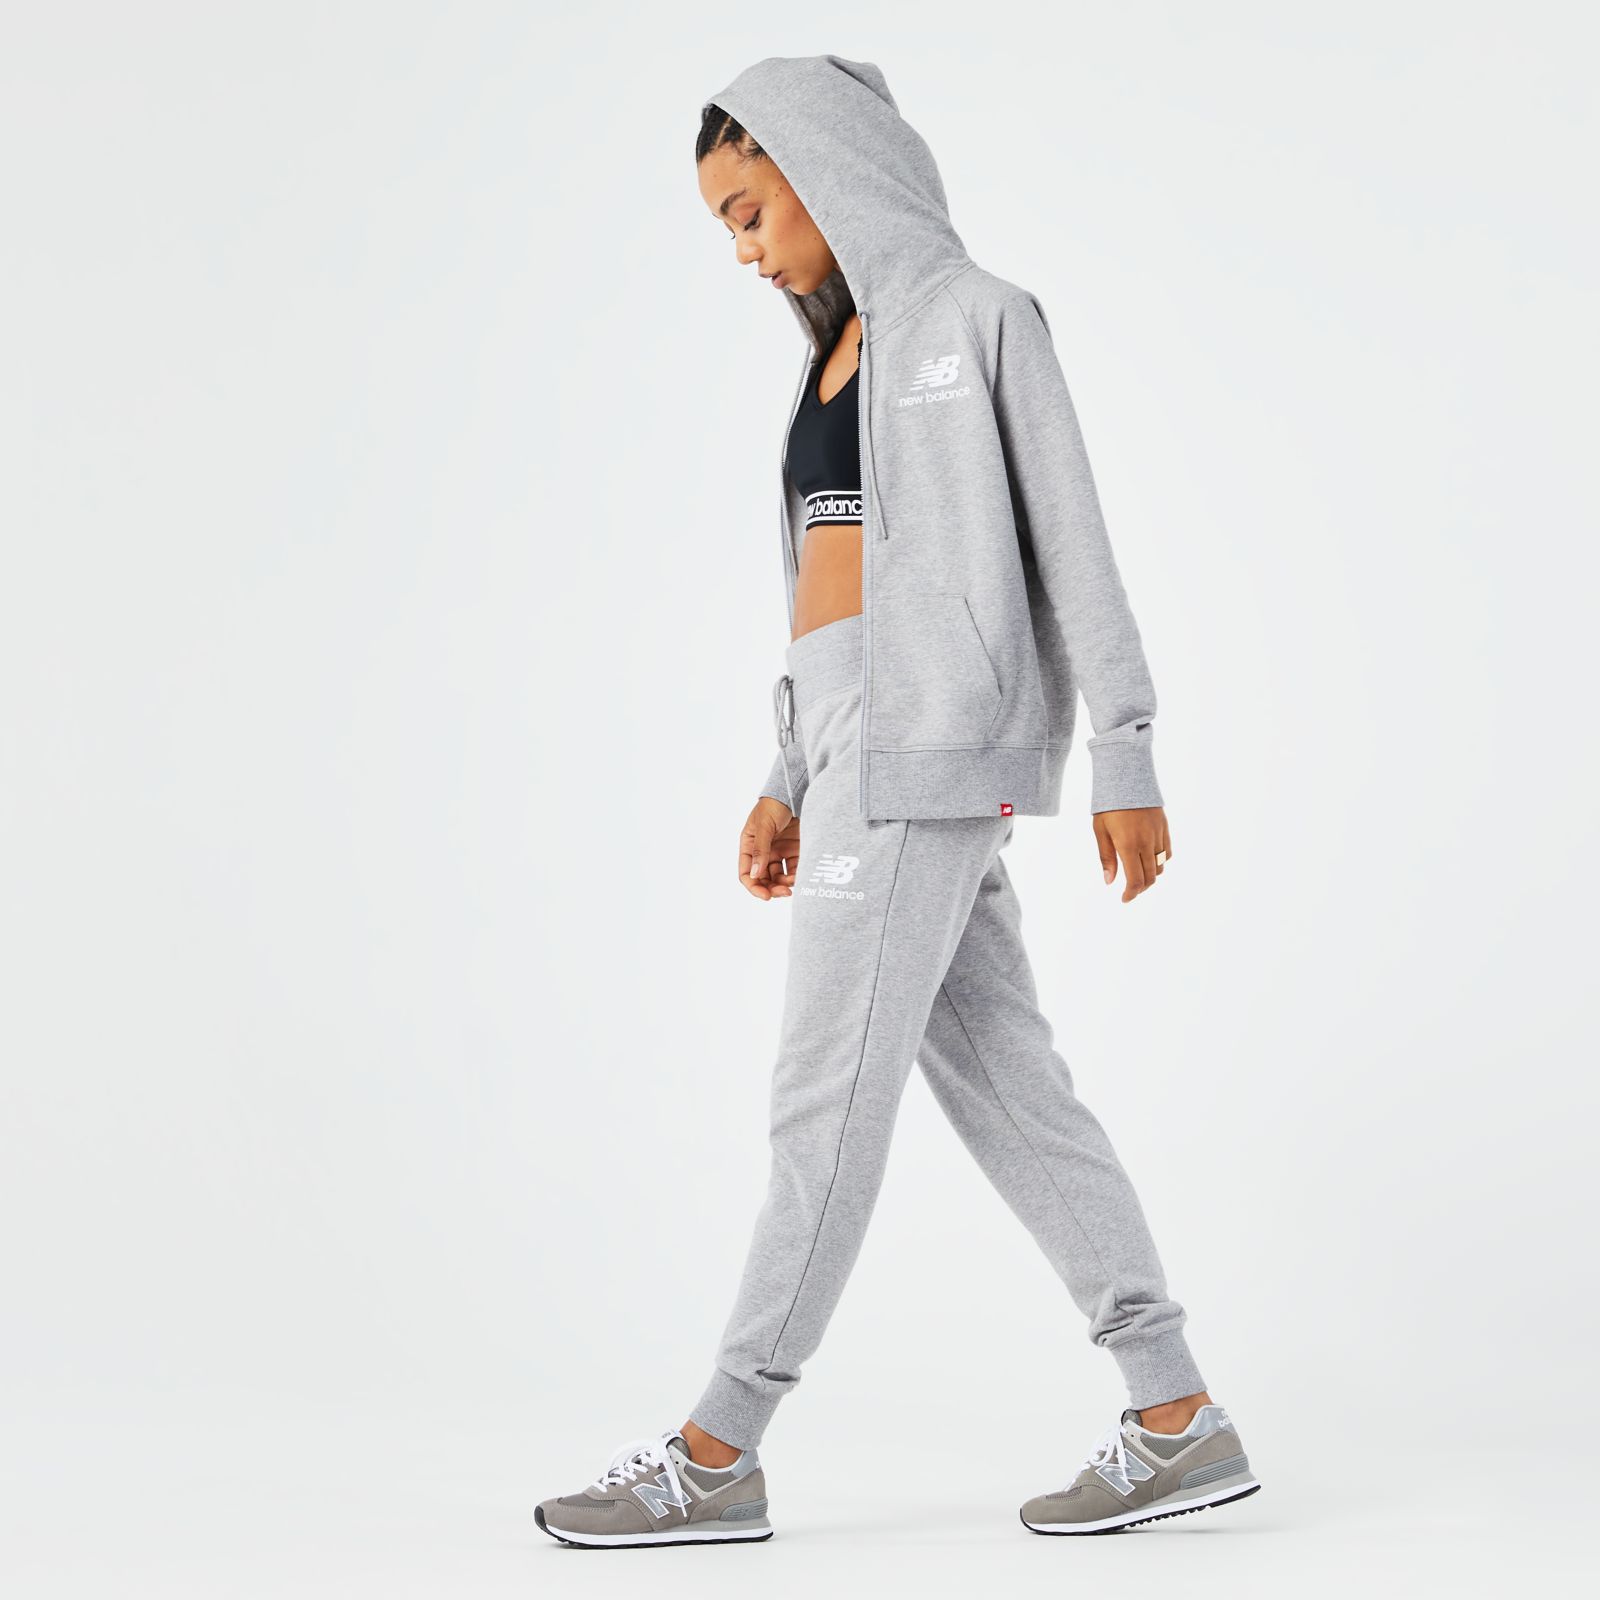 Women's NB Essentials French Terry Sweatpant Apparel - New Balance